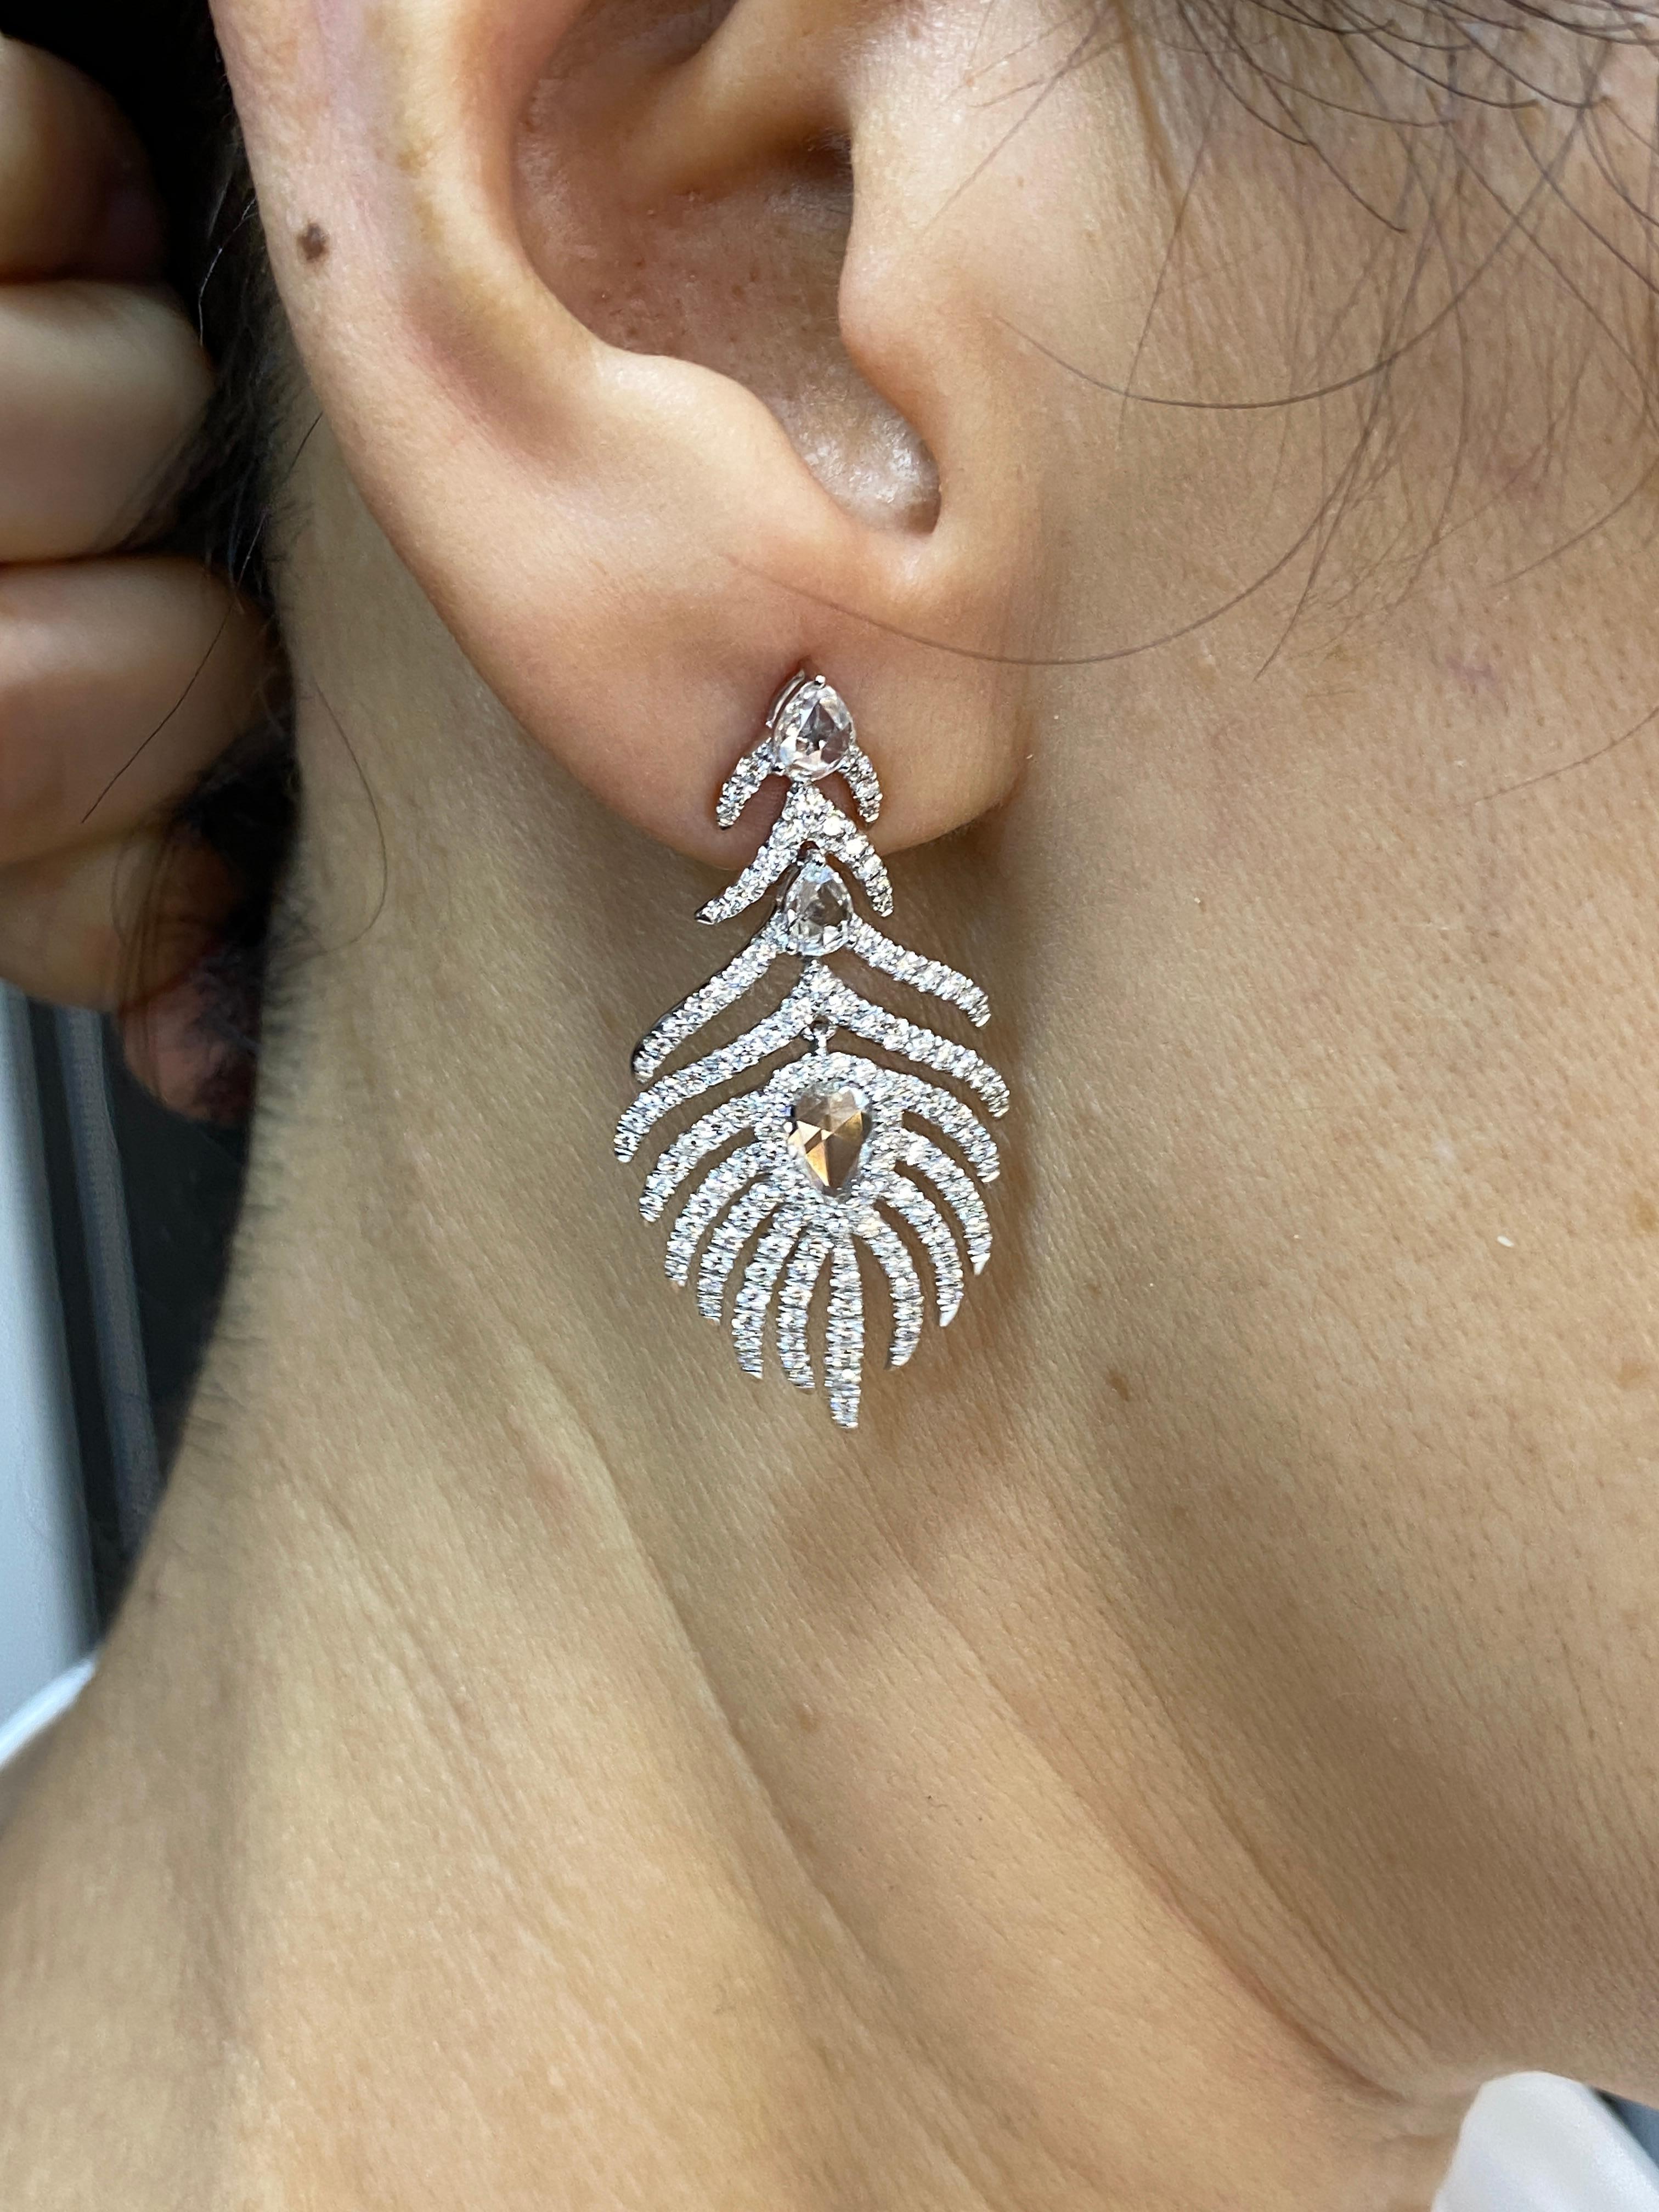 JR Rose cut Peacock Feather 18 Karat White Gold Earring

Peacock Feather made of White DIamond Rose Cut  is what dreams are made of. This Peacock Feather earring looks nothing less than a dream. Its beauty is unmatched for.

Diamond Weight : 3.21